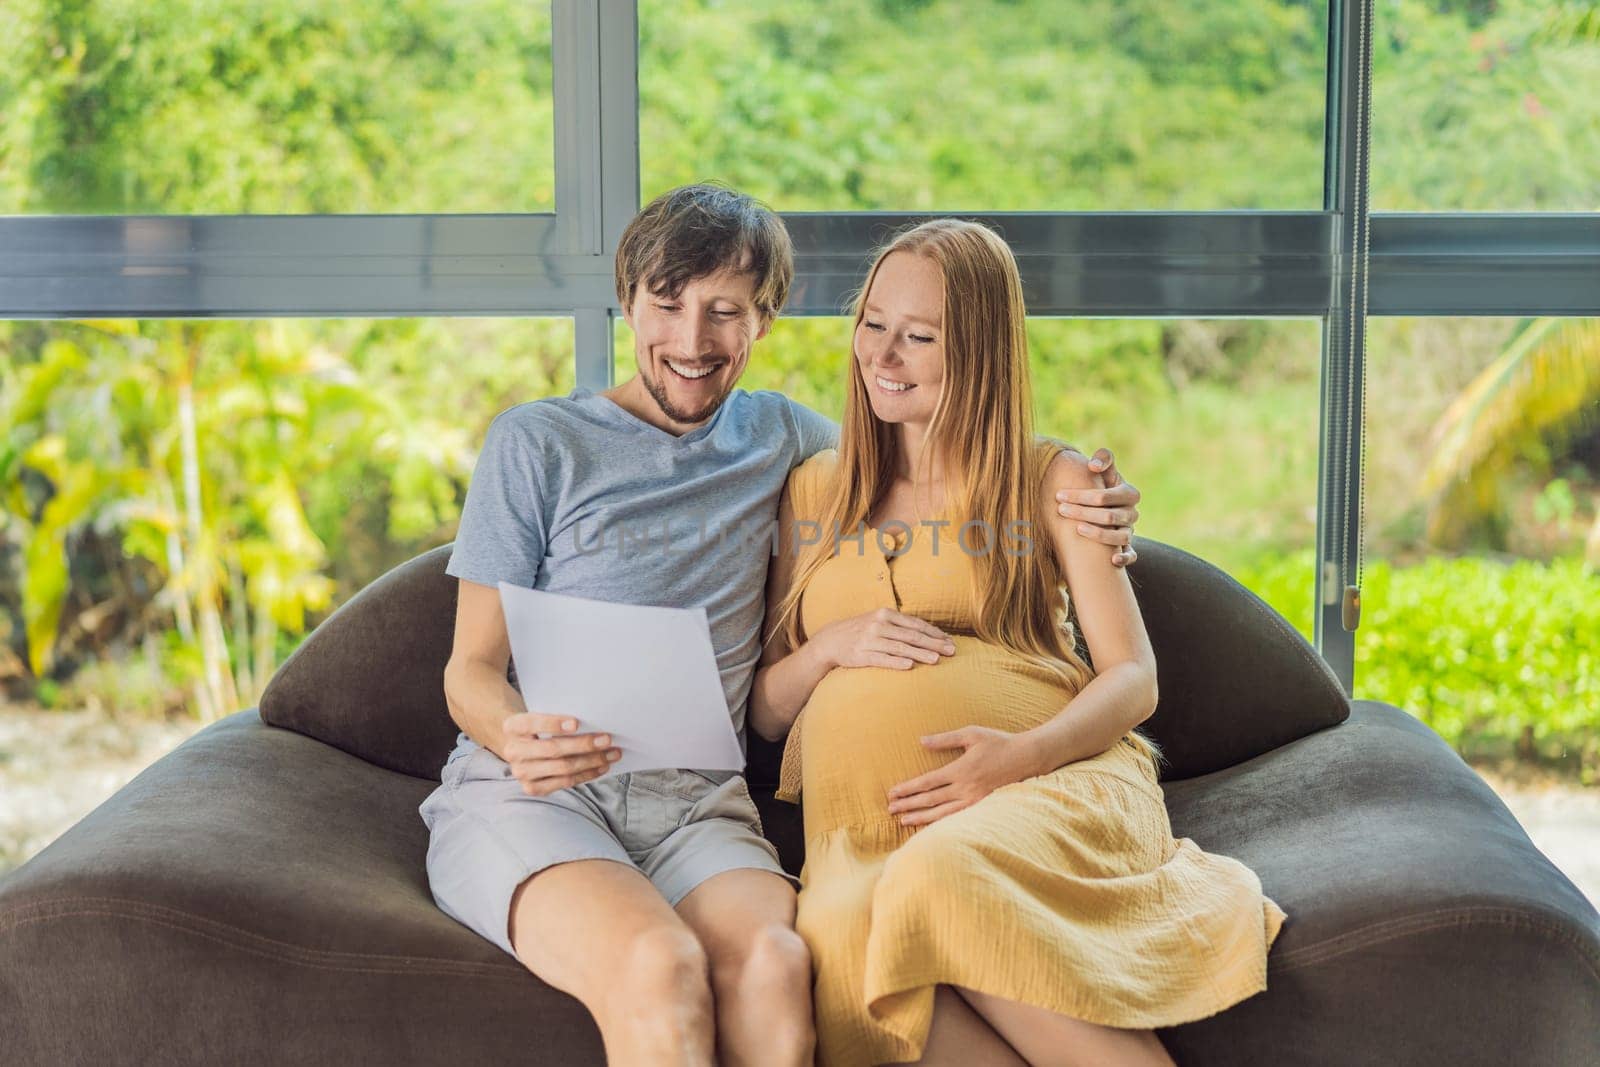 A joyful husband and his pregnant wife share a moment of excitement, smiling while looking at an important document, their faces radiating happiness and anticipation.